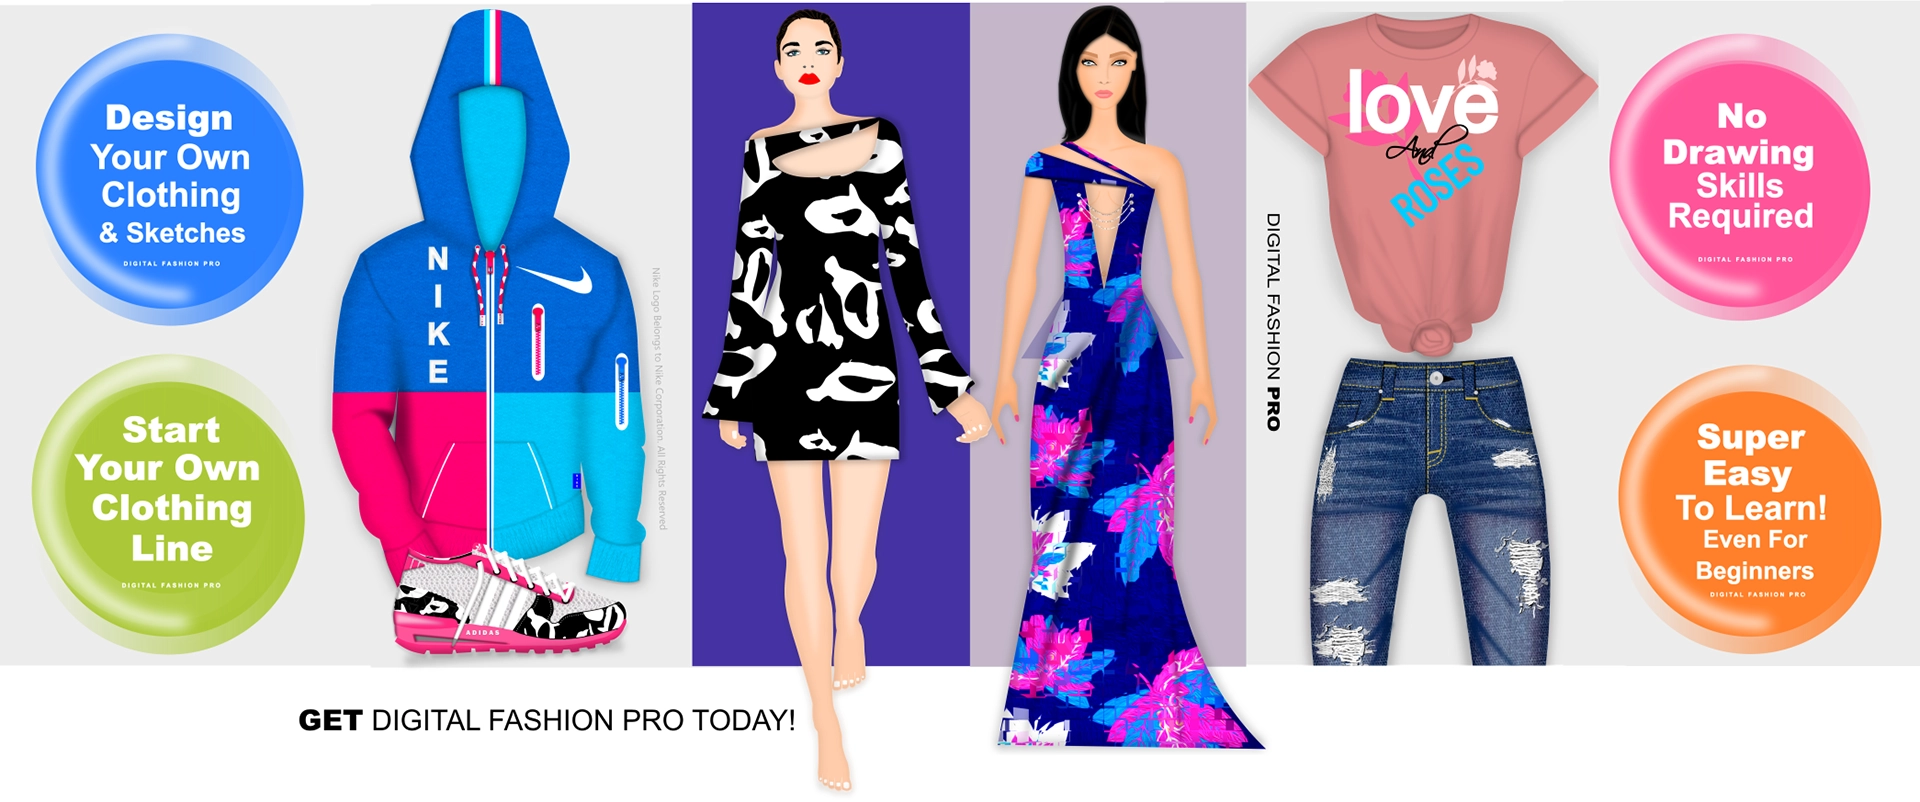 Top 16 Free and Open Source Fashion Design Software for Beginners